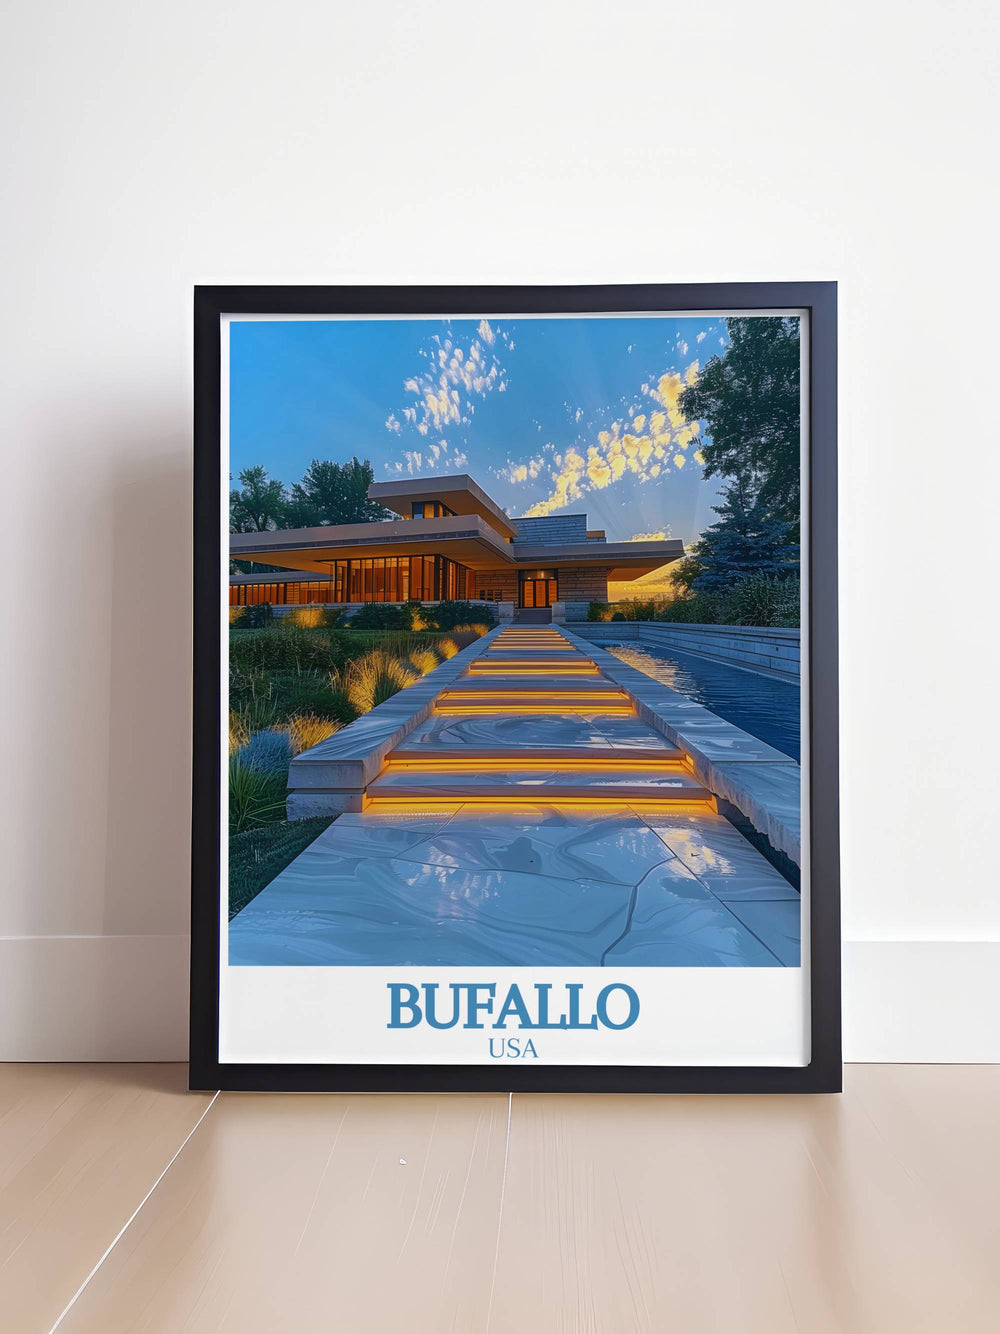 Vintage poster of Buffalo with Frank Lloyd Wrights Darwin D Martin House capturing the timeless elegance and historical significance of this landmark great for digital downloads and unique gifts